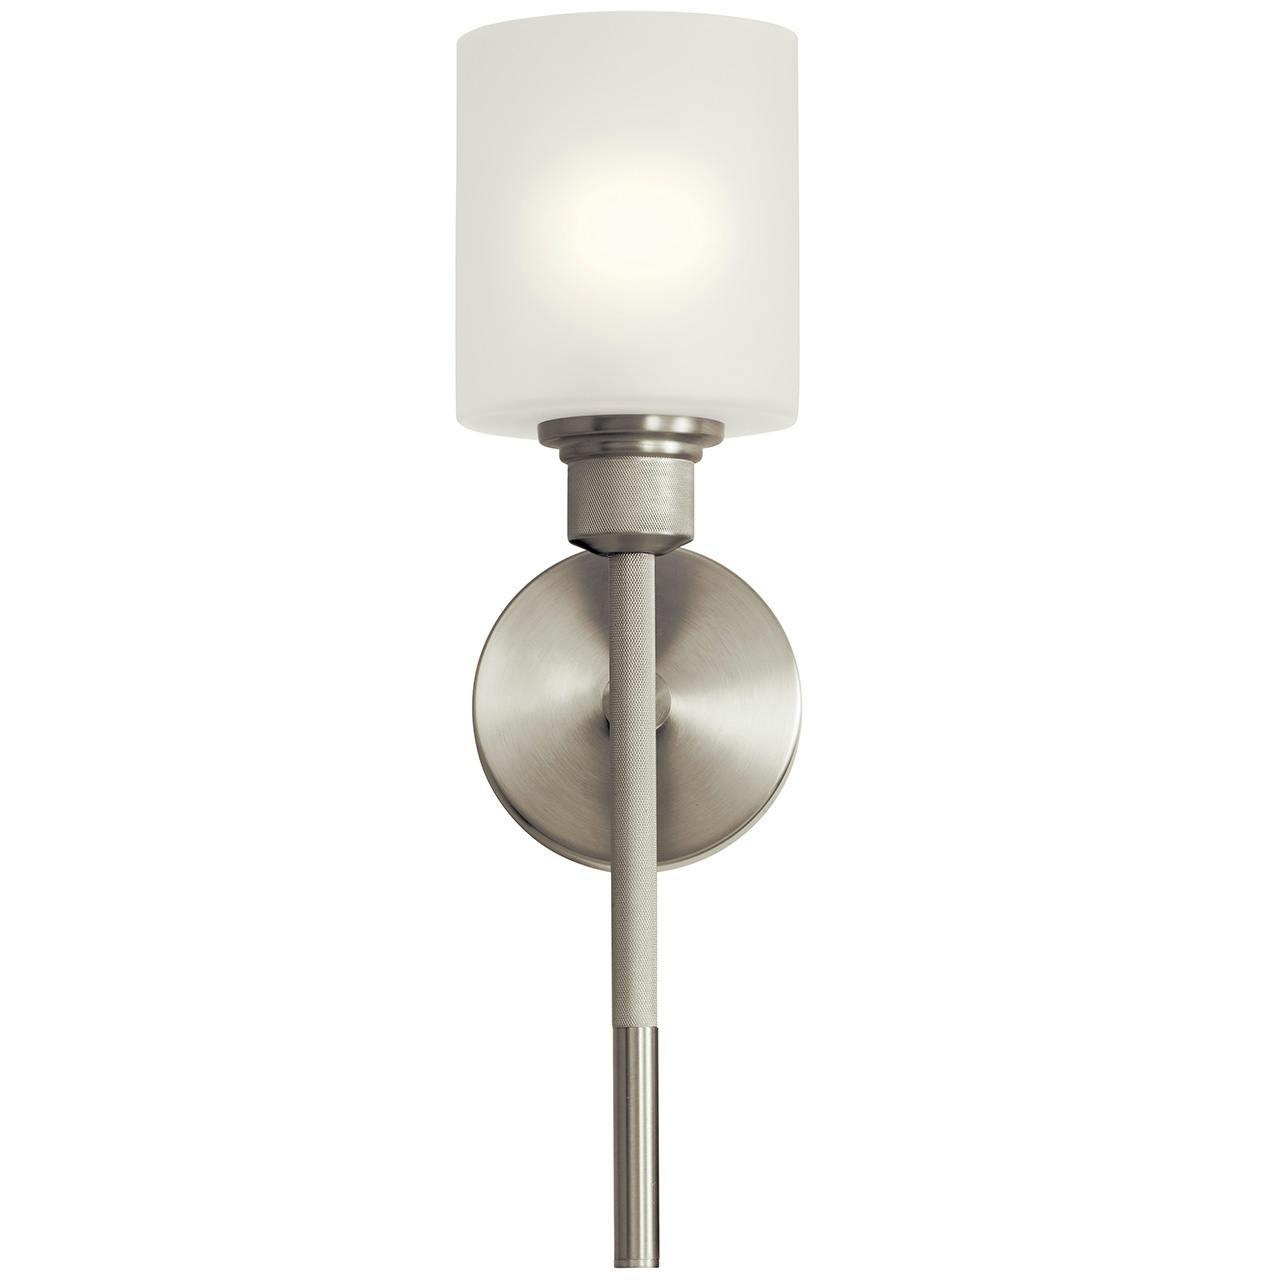 The Lynn Haven 1 Light Sconce Brushed Nickel facing up on a white background